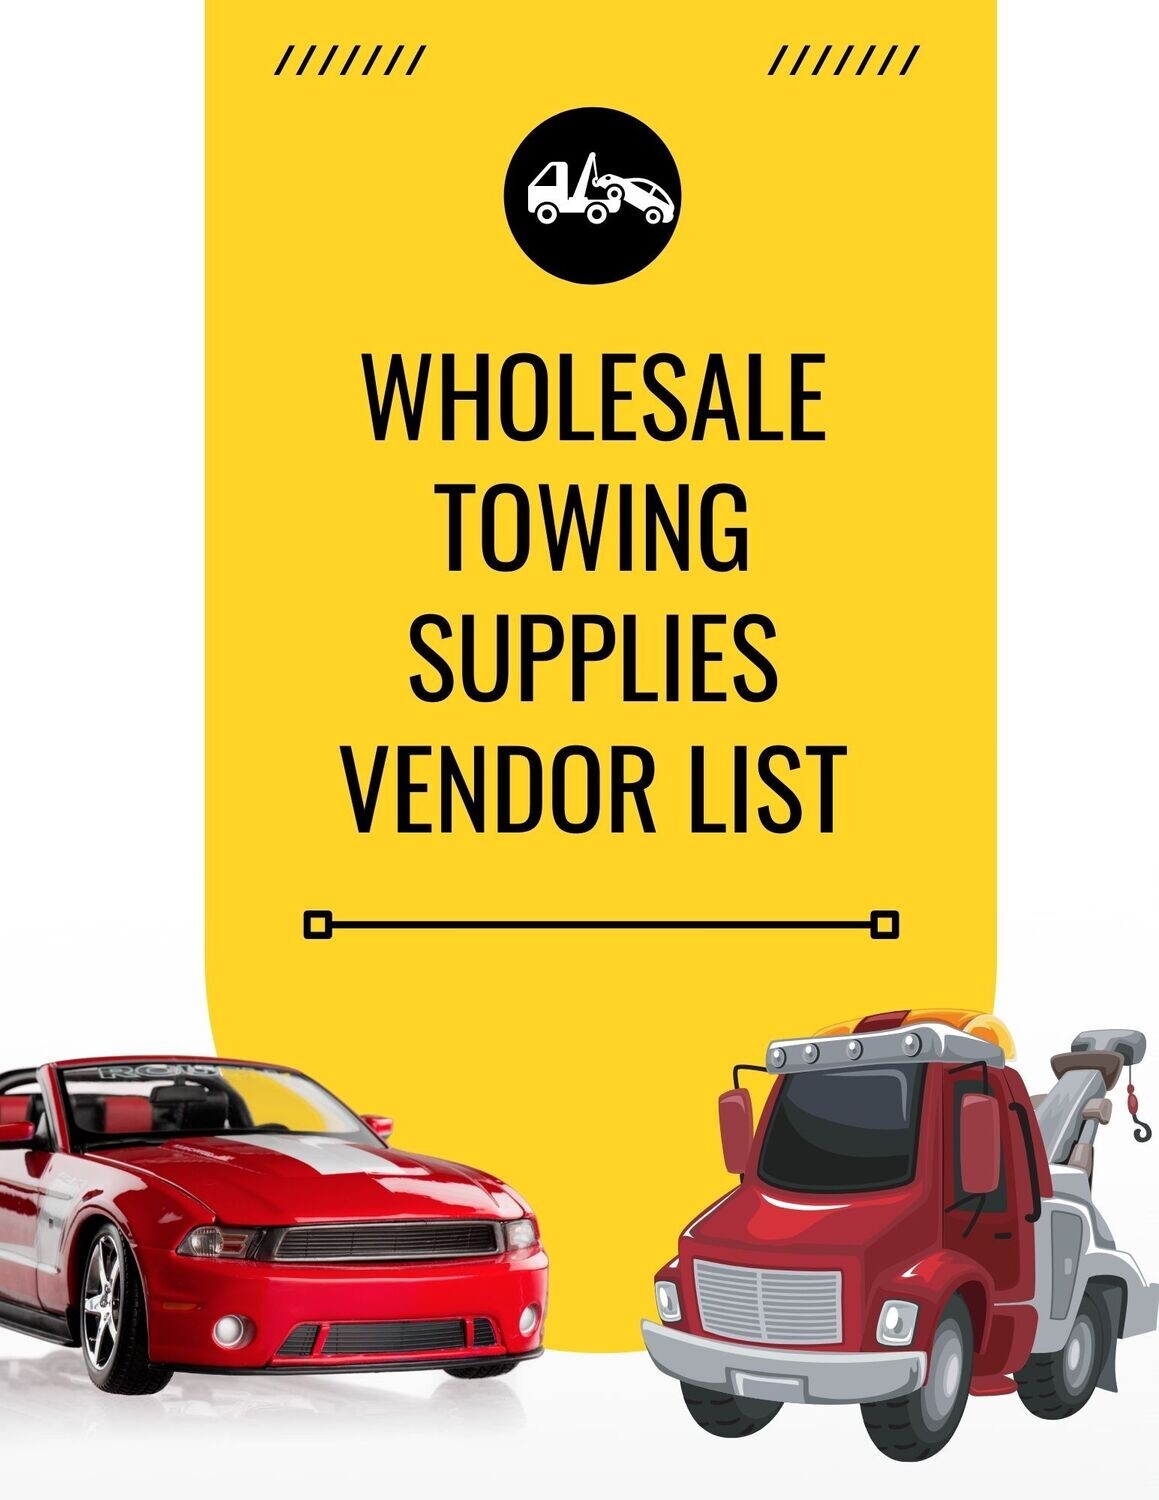 Verified Wholesale Towing Supplies Vendor List - Where to Buy Tow Truck Equipment - Recovery Supplies